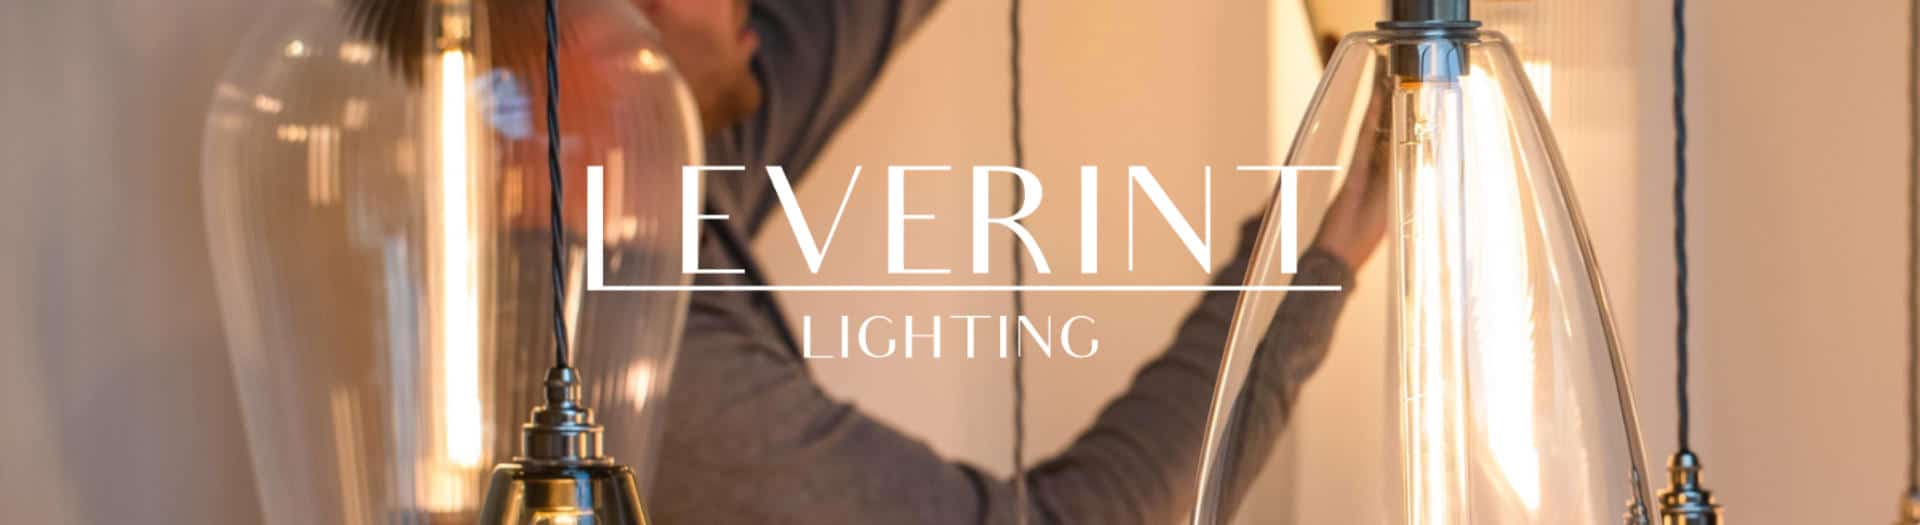 Leverint lighting close up with white logo made in Britain lighting